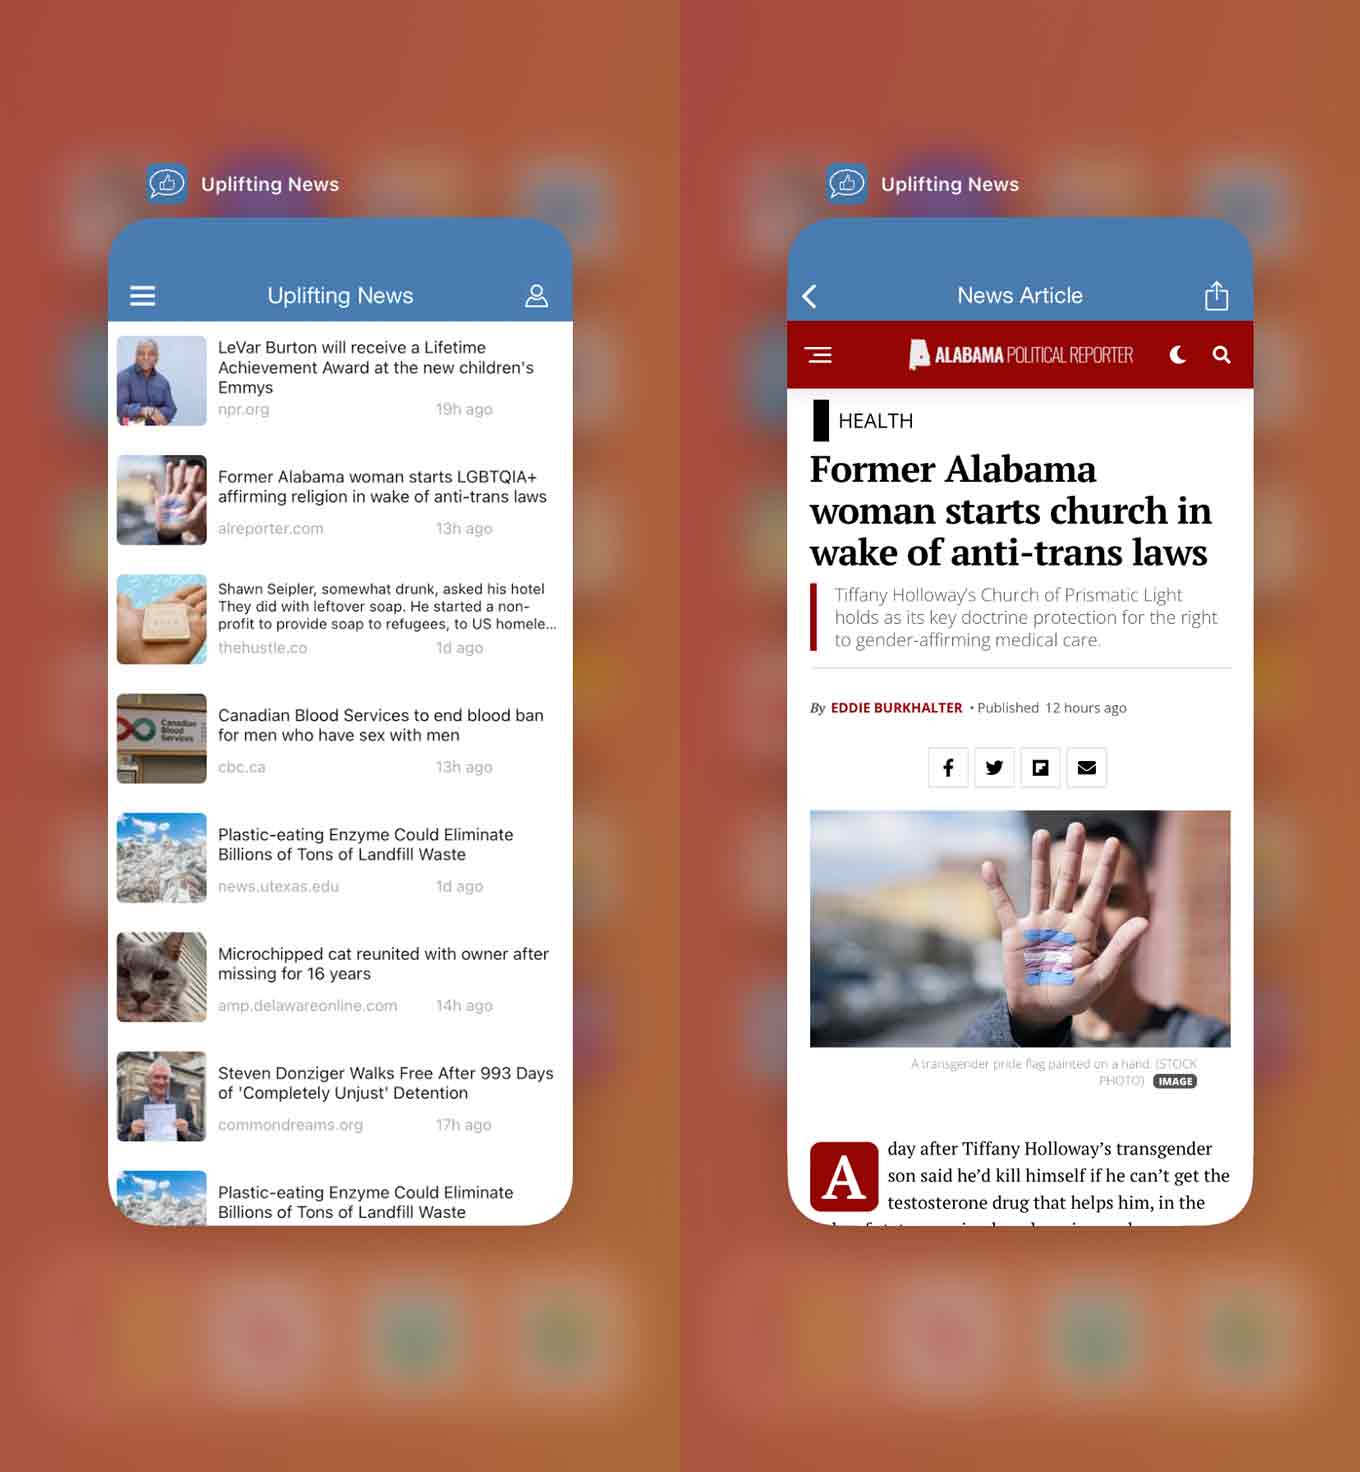 Good News App Uplifting News, showing a series of positive news articles, including a story about a Former Alabama woman starting a church in wake of anti-trans laws